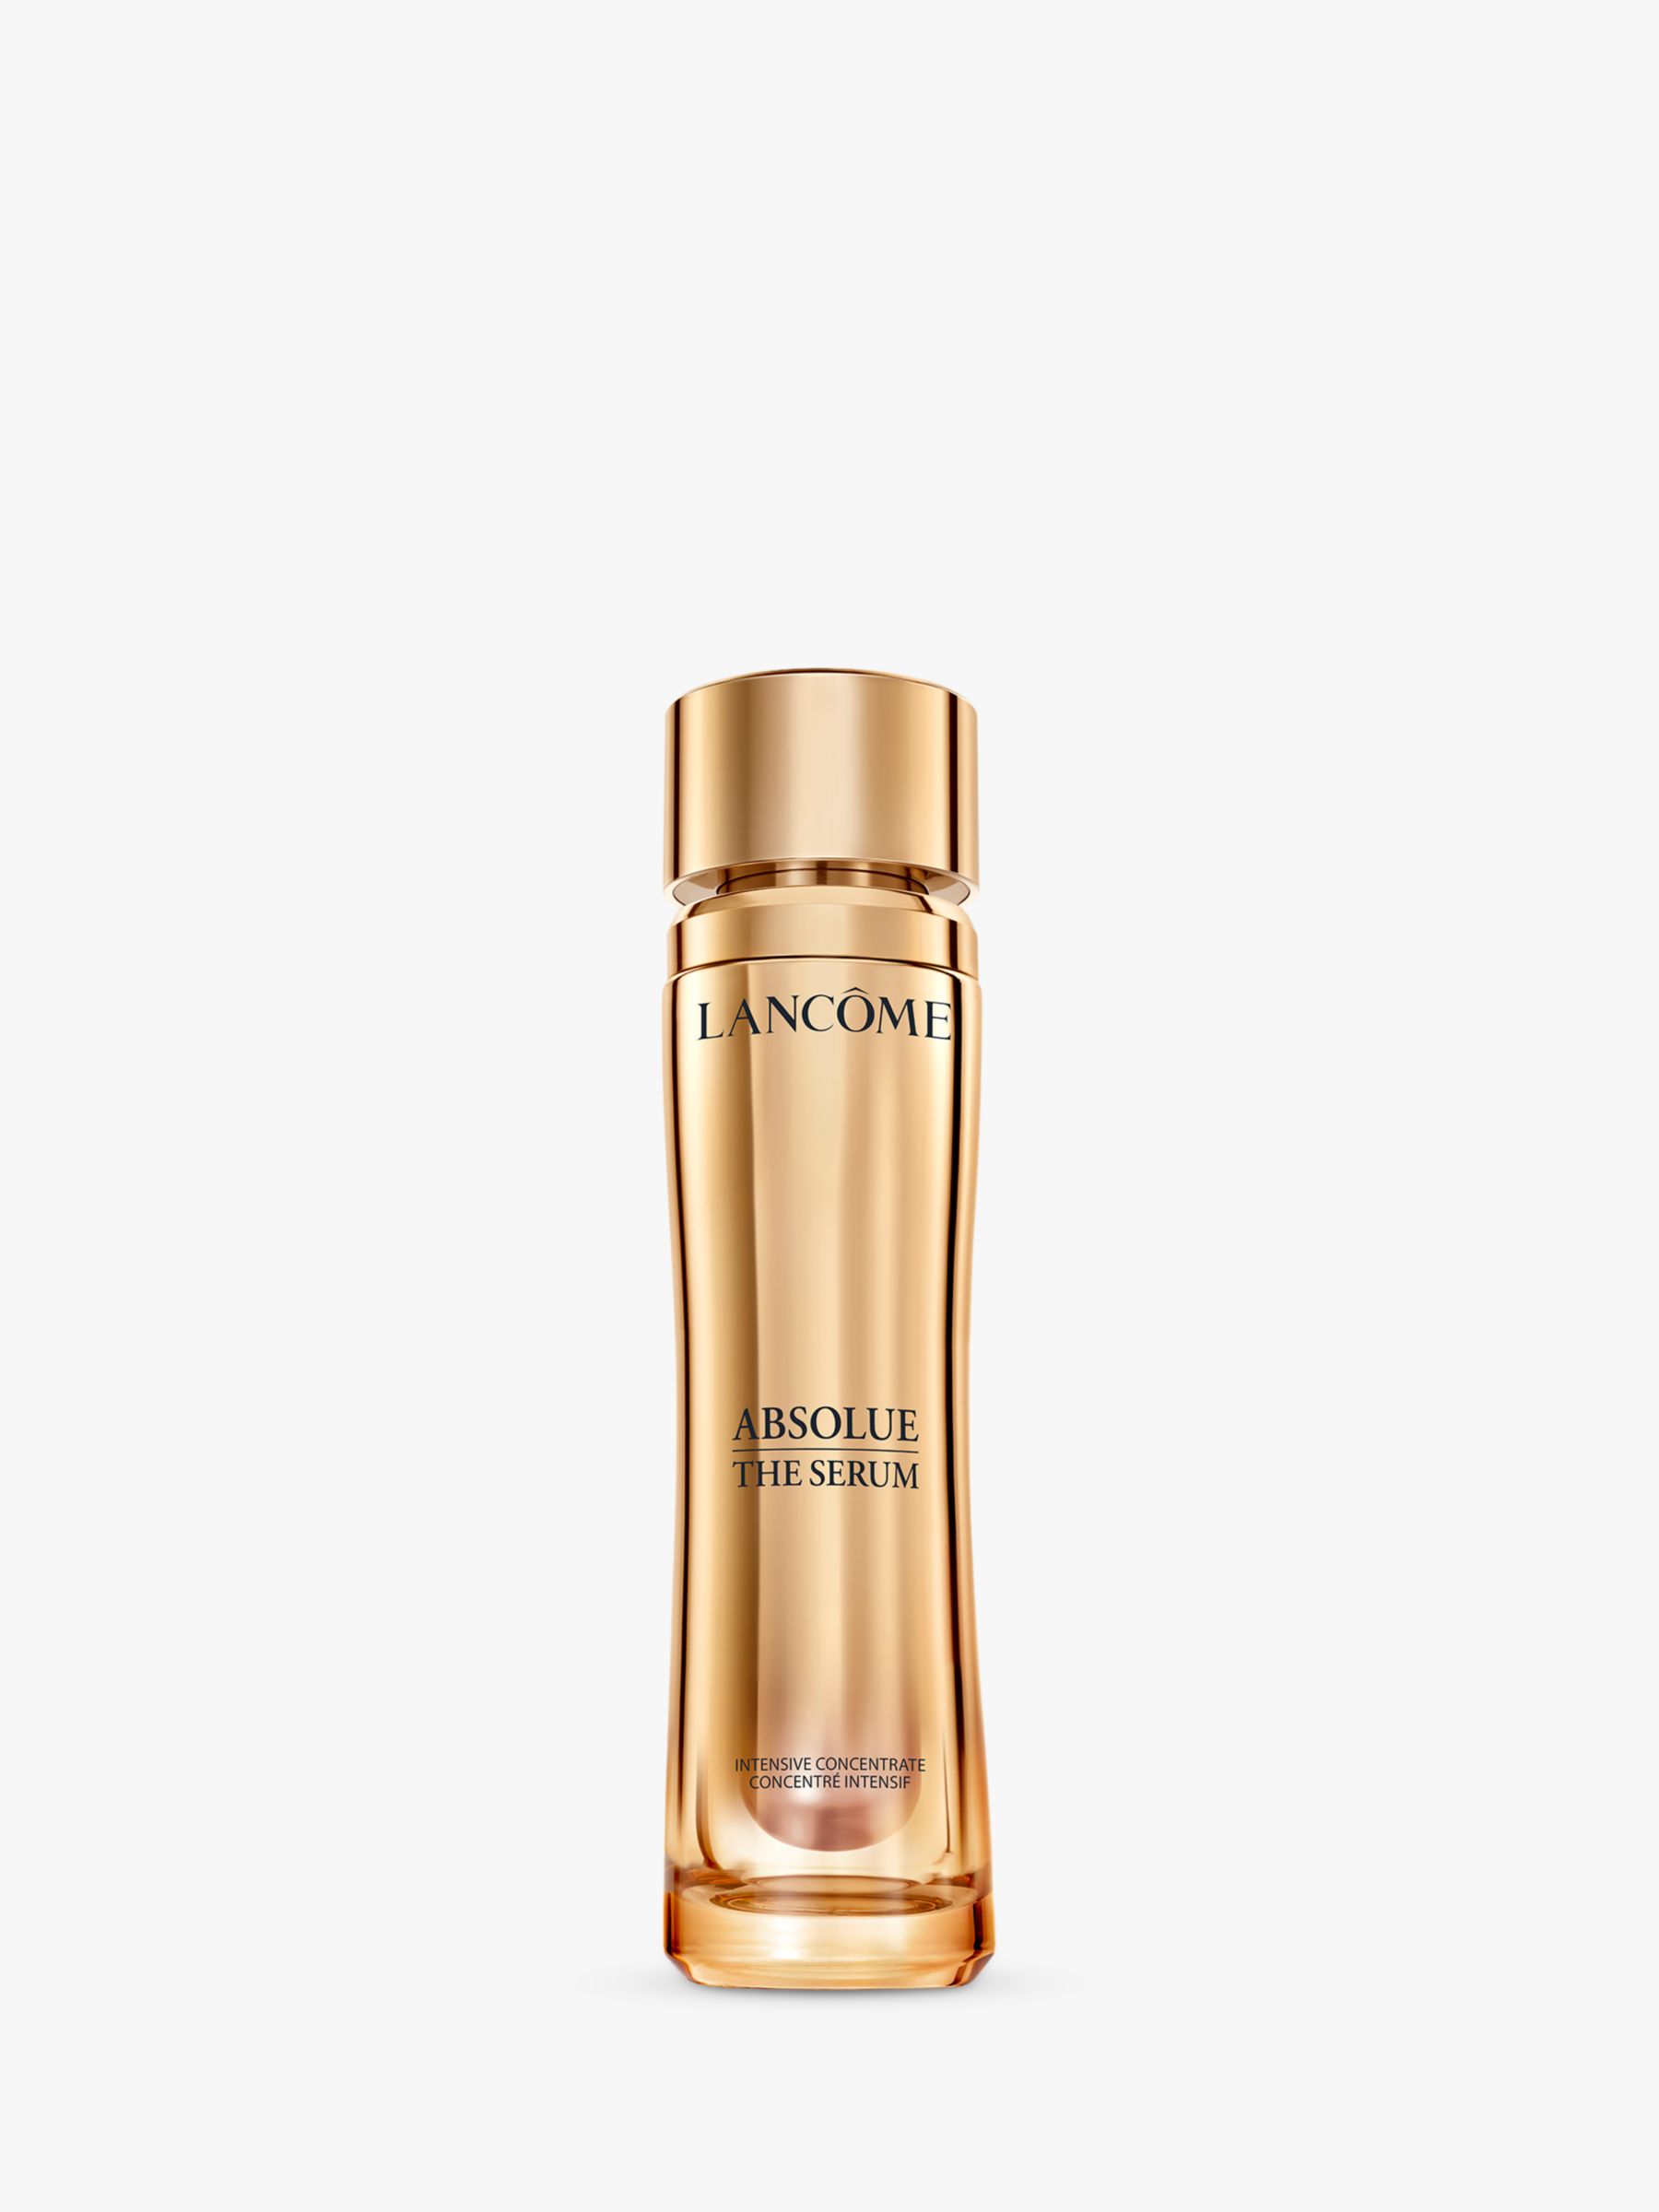 Lancôme Absolue The Serum Intensive Concentrate, 30ml 1